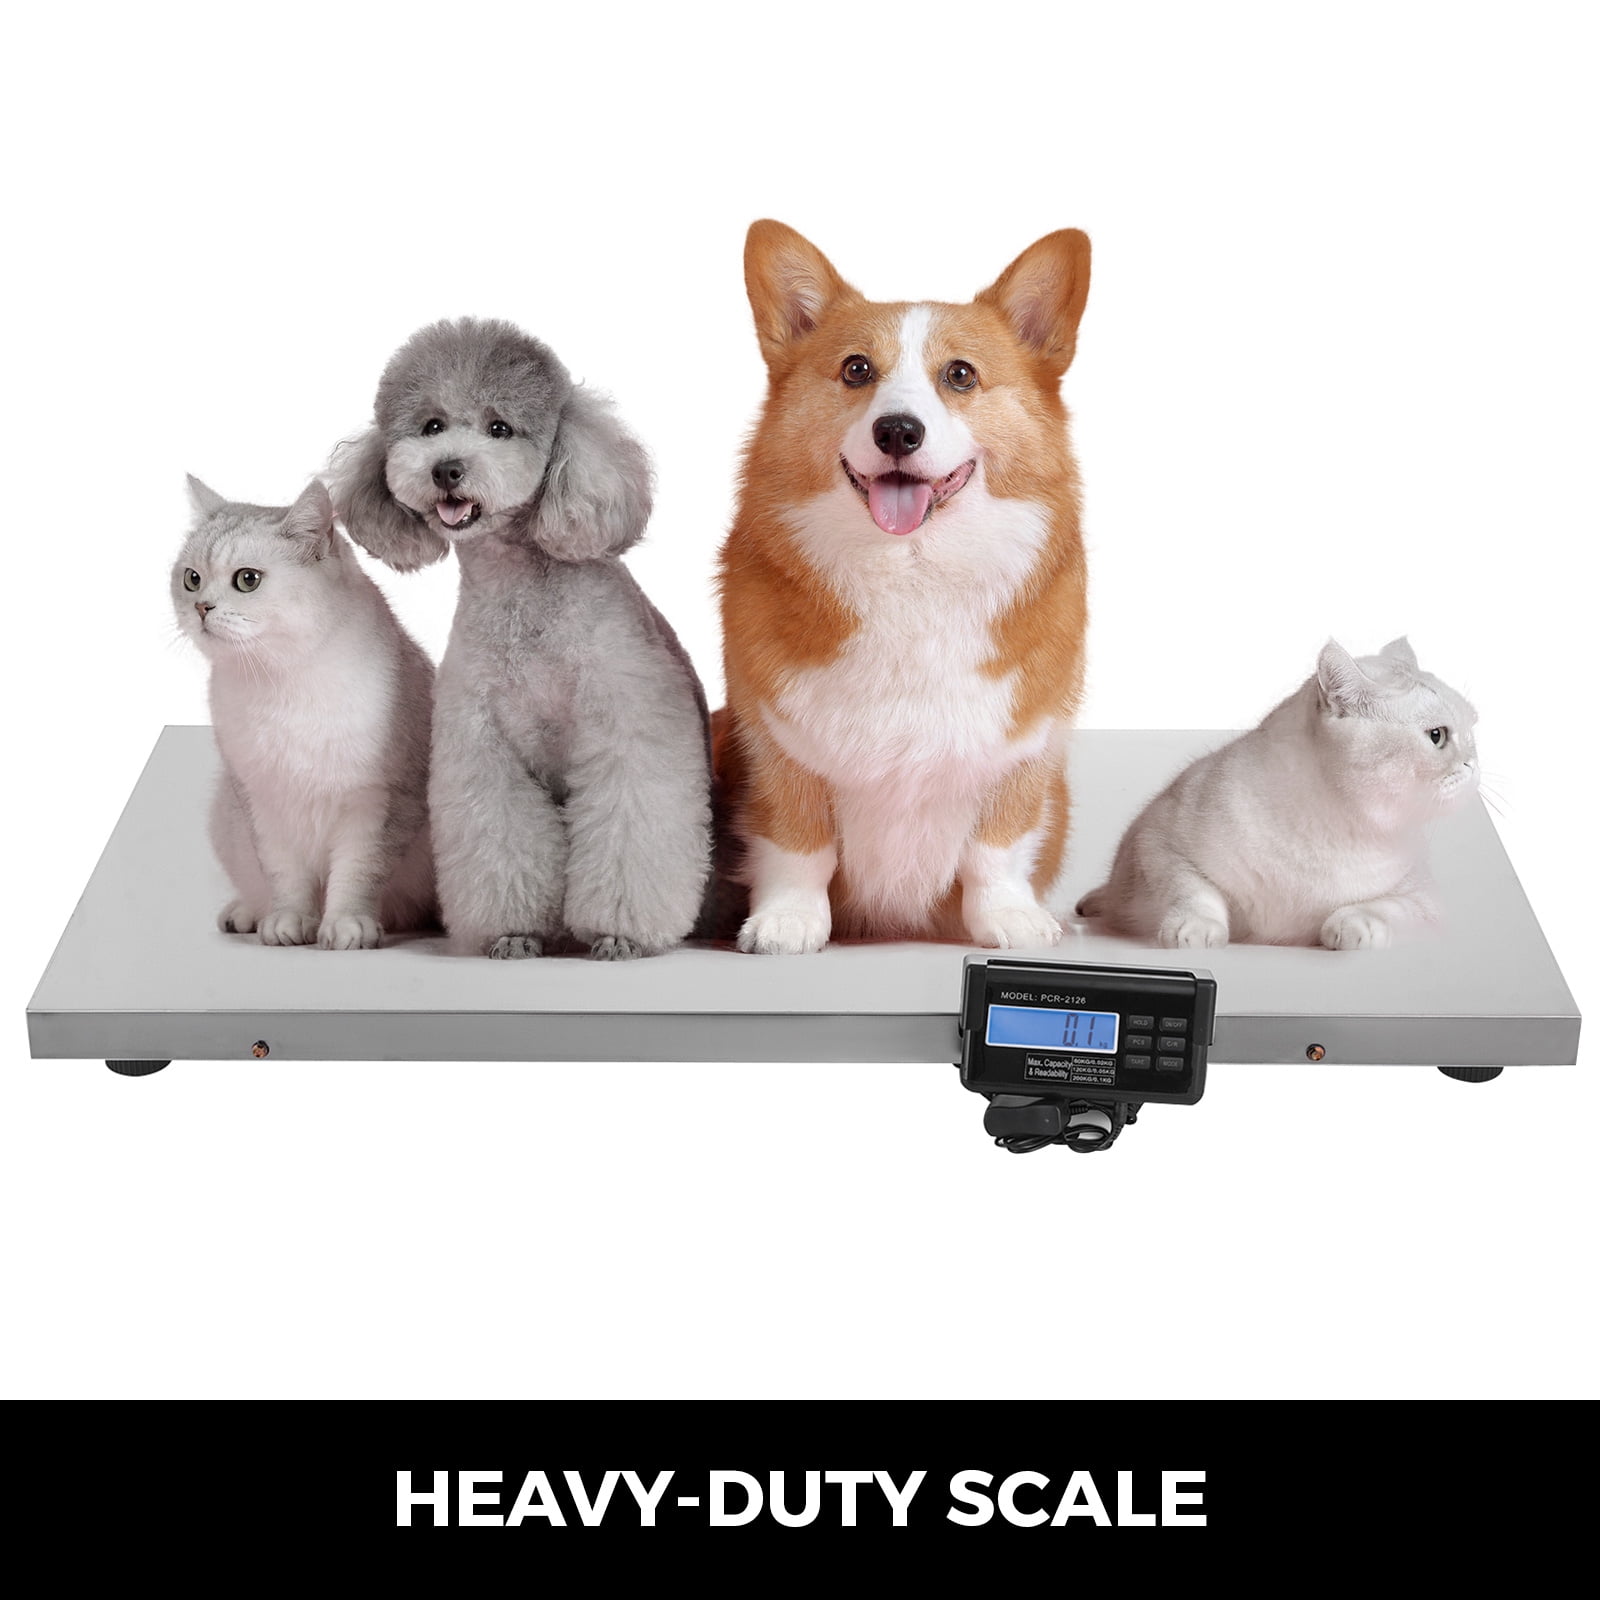 3 Measure TTLIFE 440Lbs Digital Livestock Scale Large Pet Vet Scale 43.3 x 21.6 Stainless Steel Platform Electronic Postal Shipping Scale Heavy Duty Large Dog Cat Hog Sheep Goat Pig Sheep Scale 